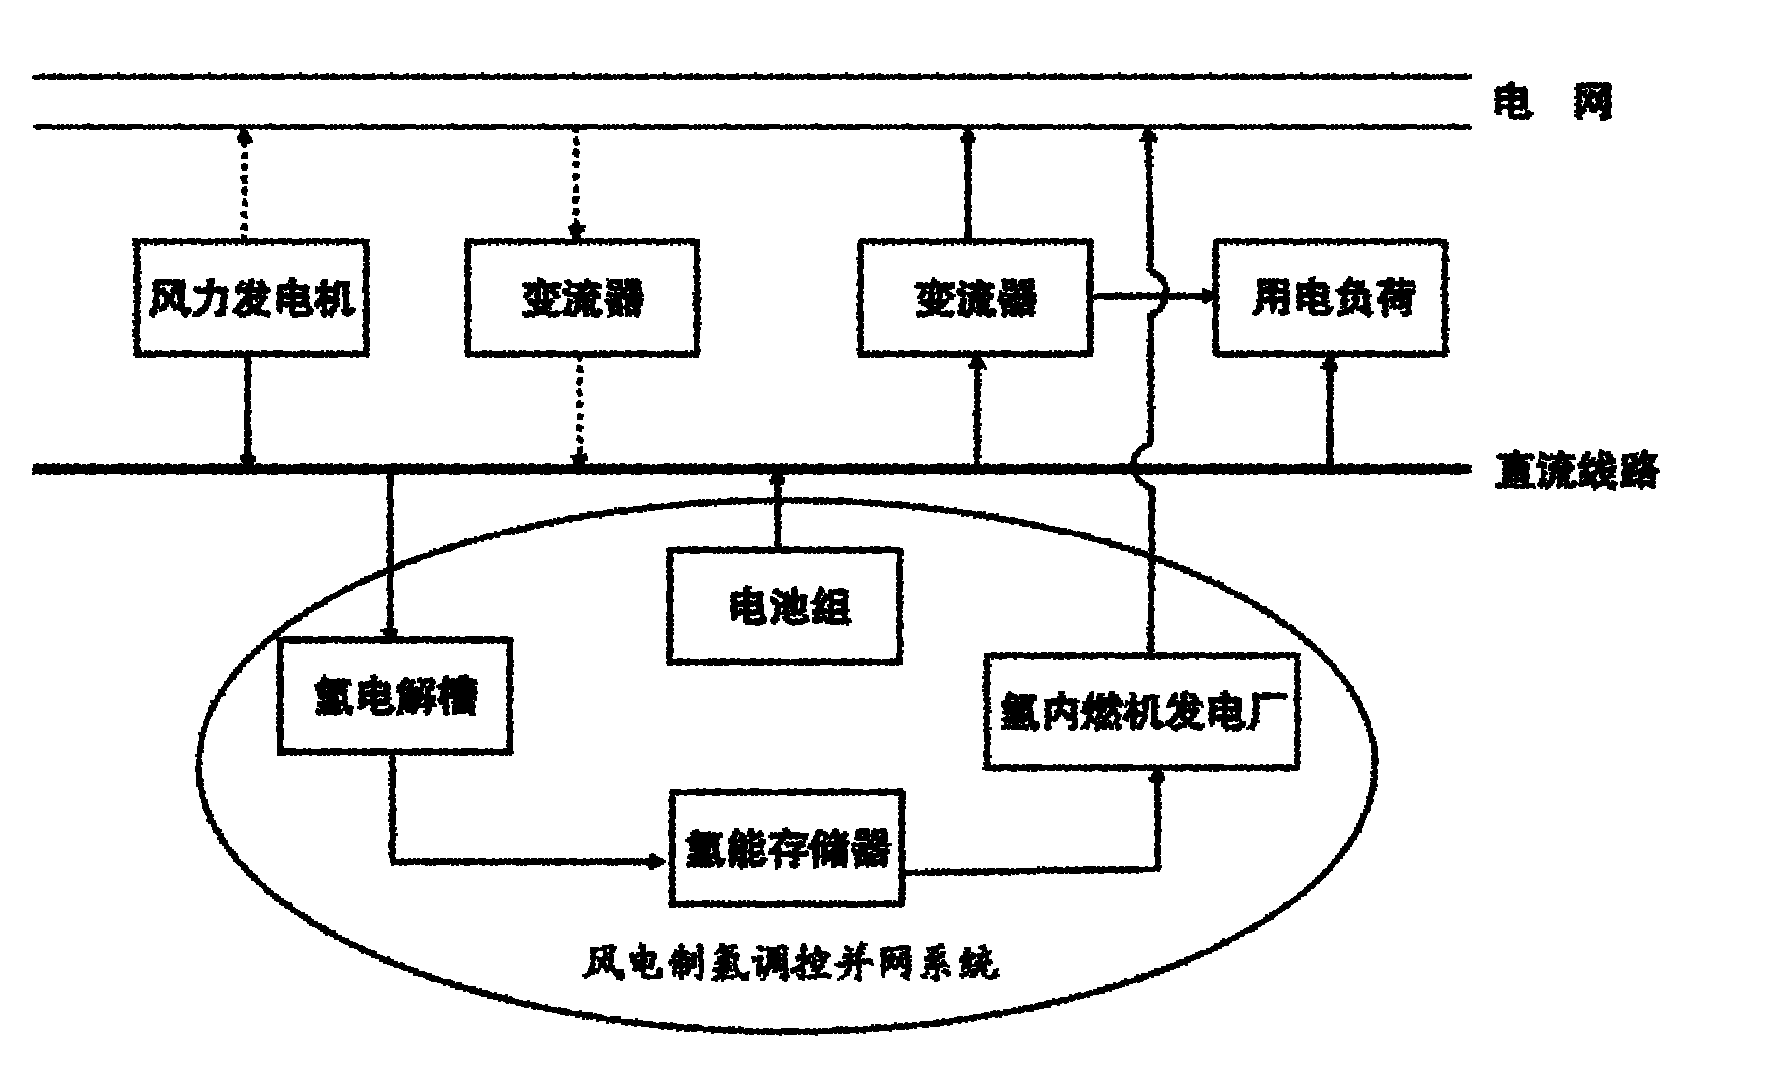 Wind power hydrogen production regulation, control and grid-connection system